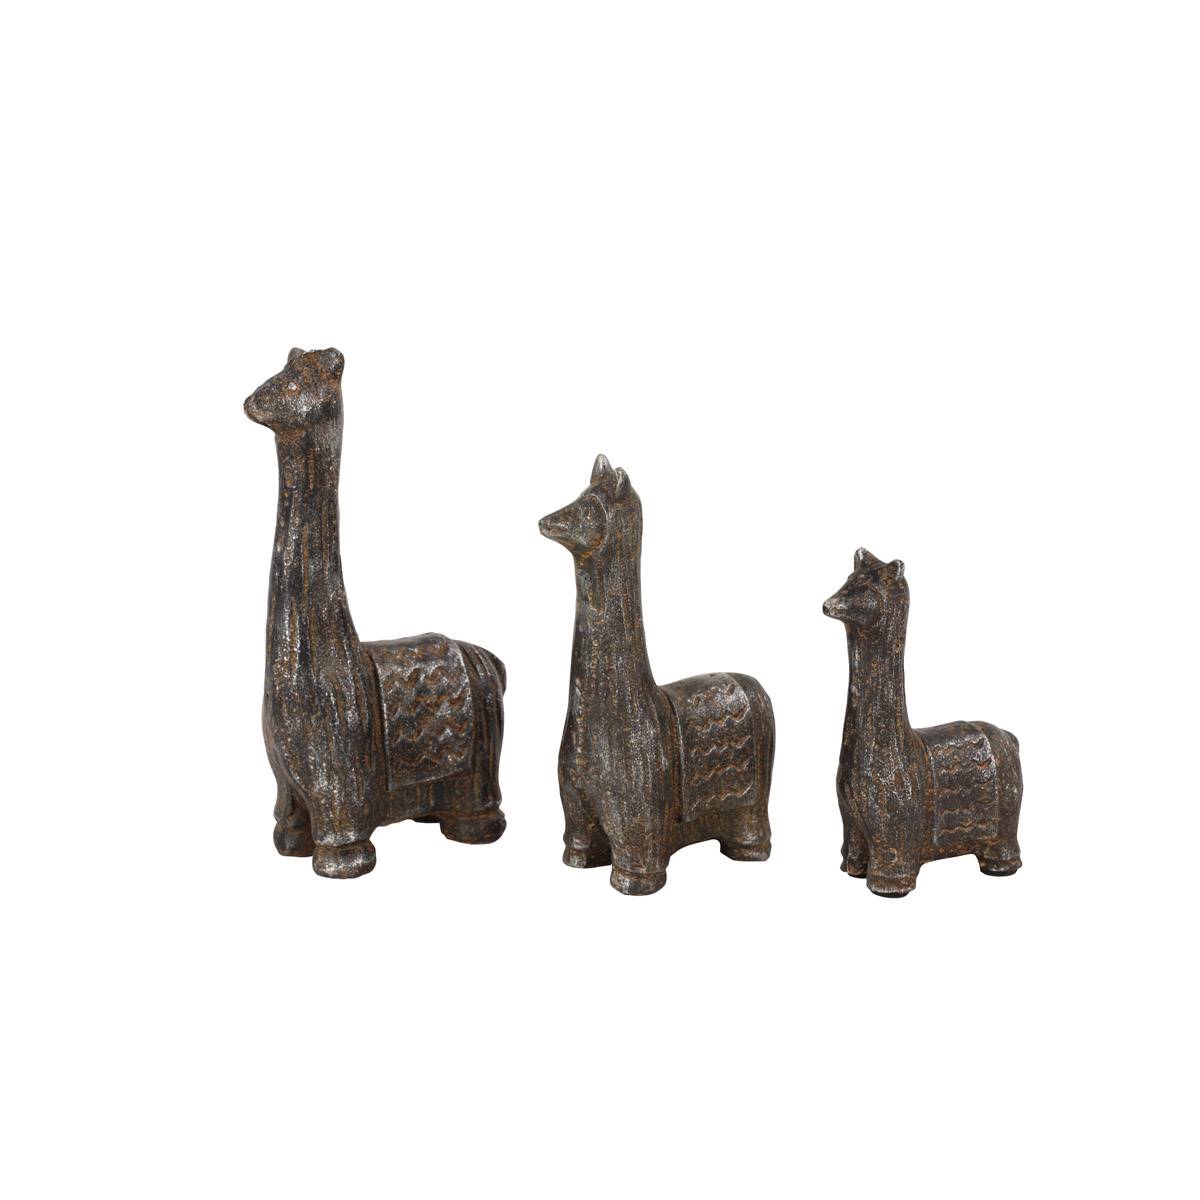 9th & Pike(R) Silver Carved Llama Figurines - Set of 3